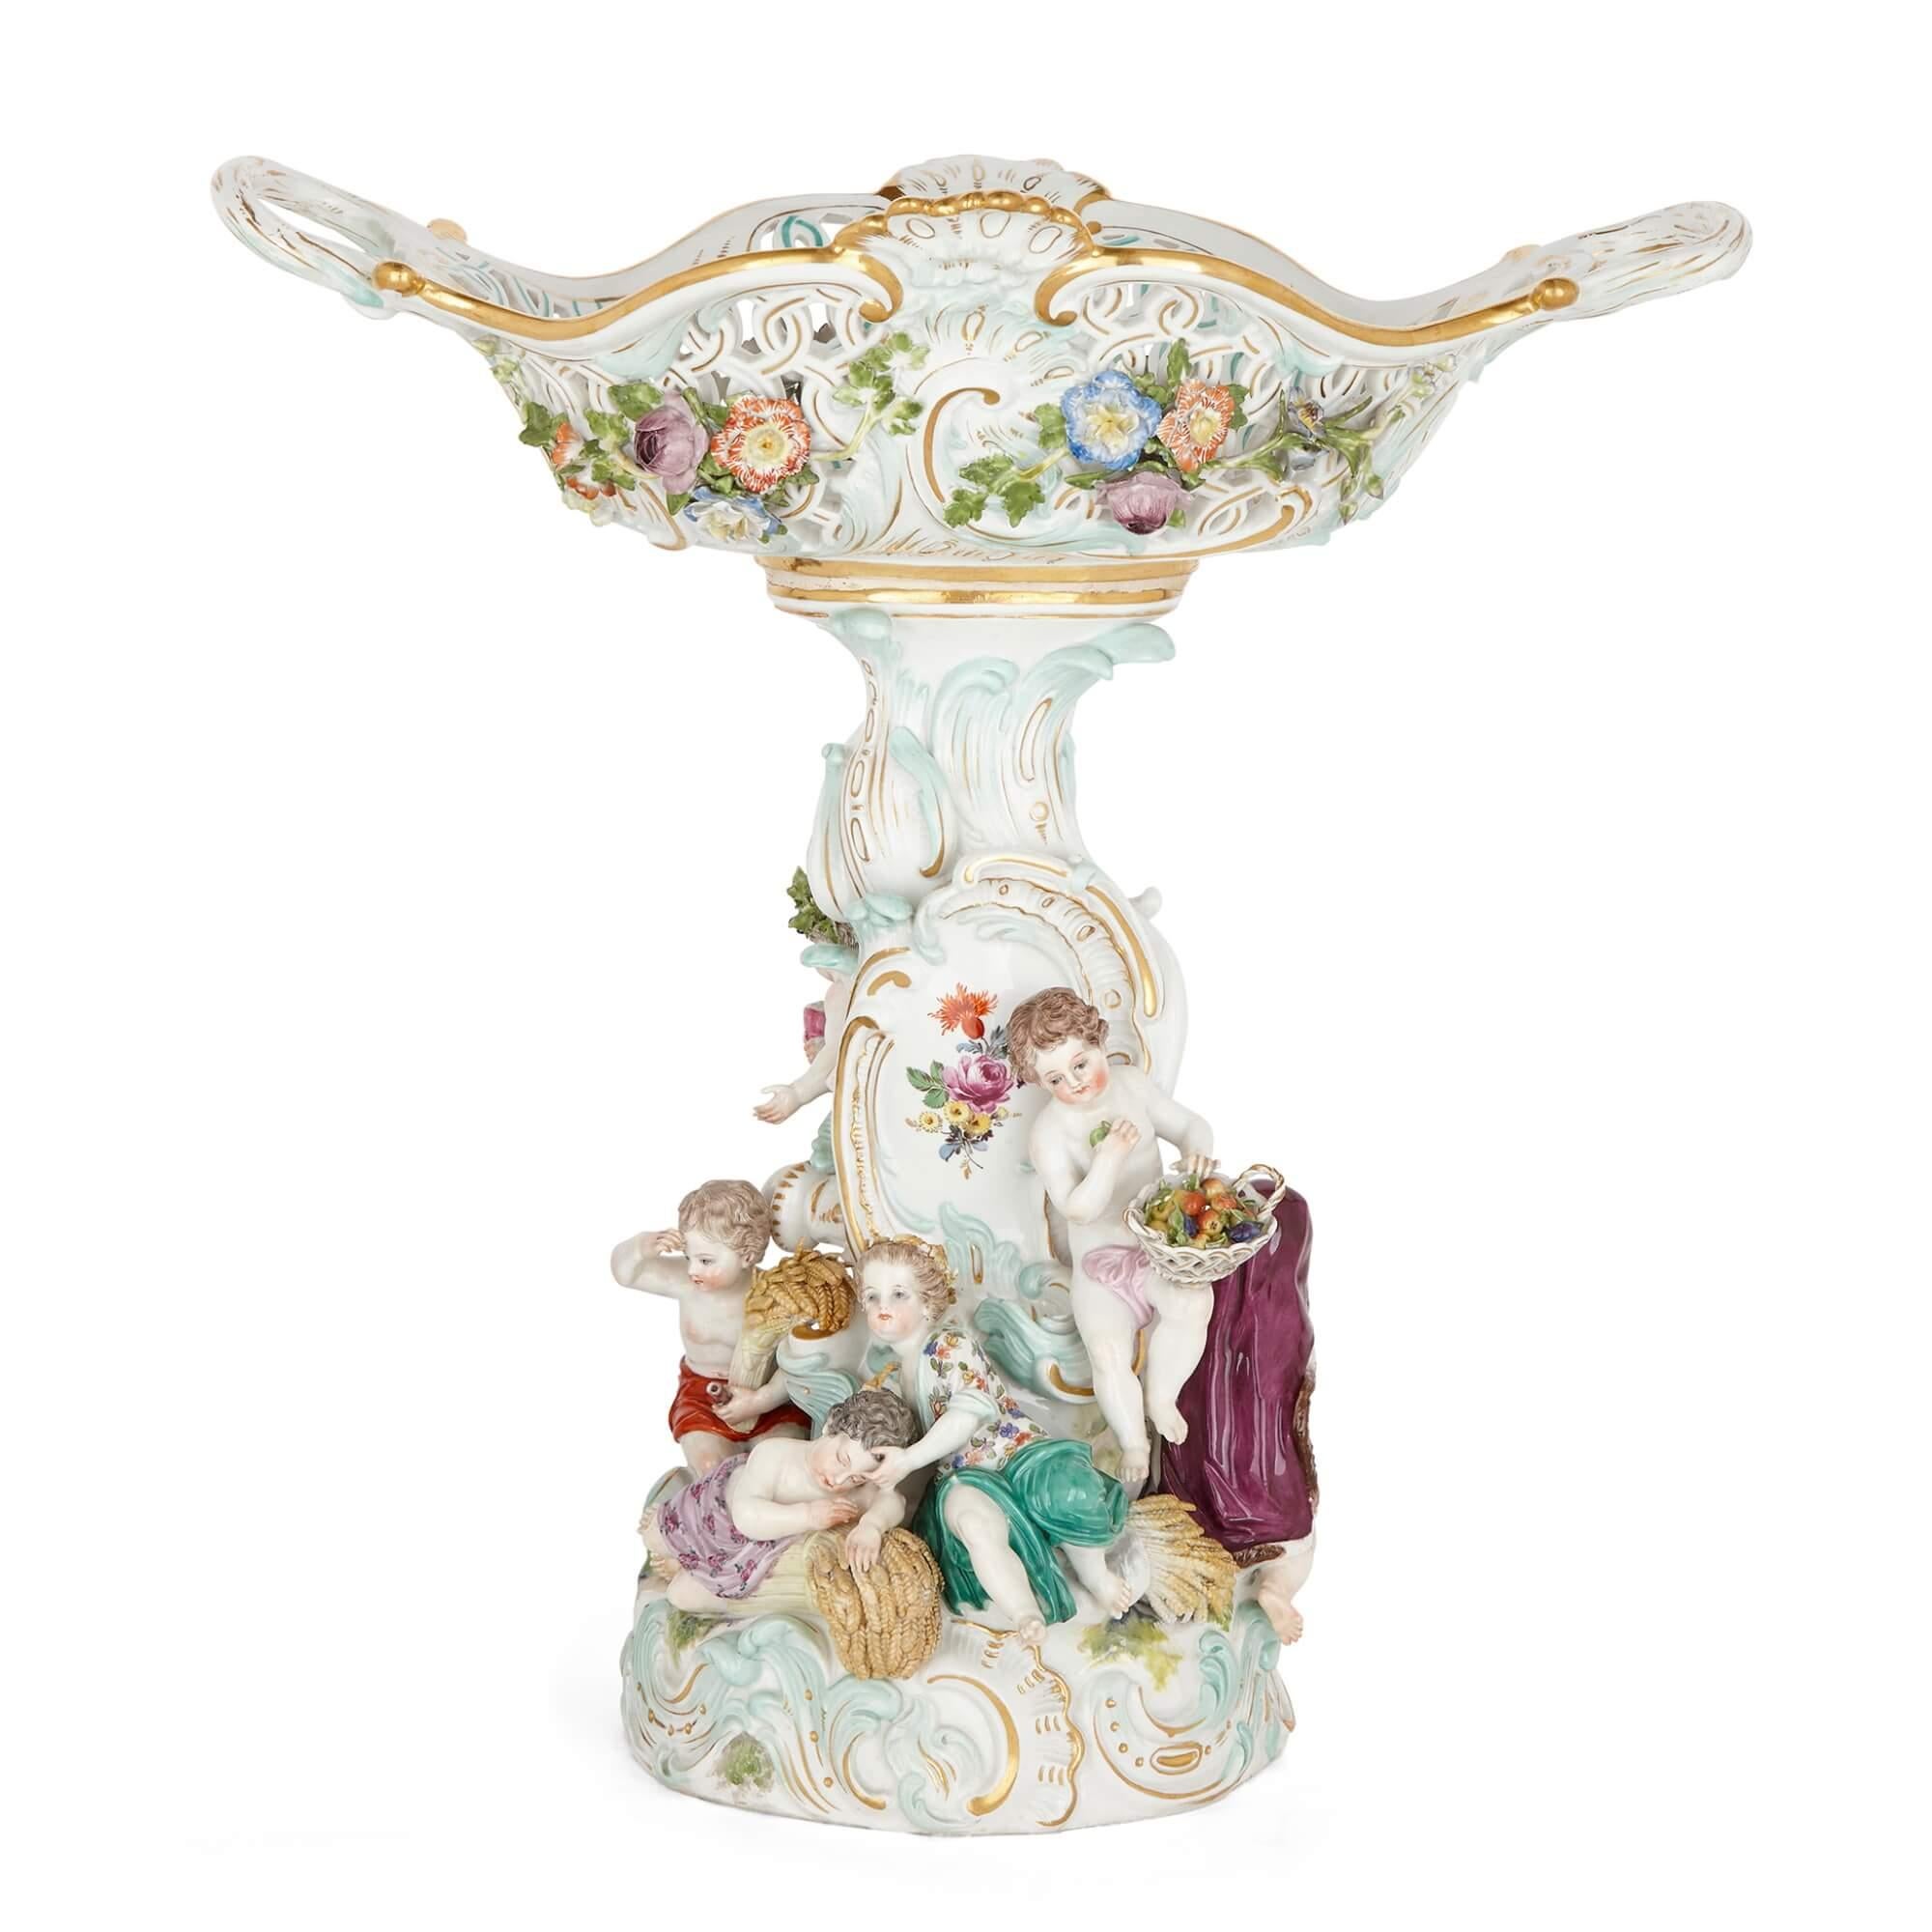 Large Meissen porcelain Rococo style centrepiece
German, Late 19th Century
Height 42cm, width 40cm, depth 25cm

According to a design by E. A. Leuteritz, this superb centrepiece was made by the Meissen porcelain manufactory in the late nineteenth